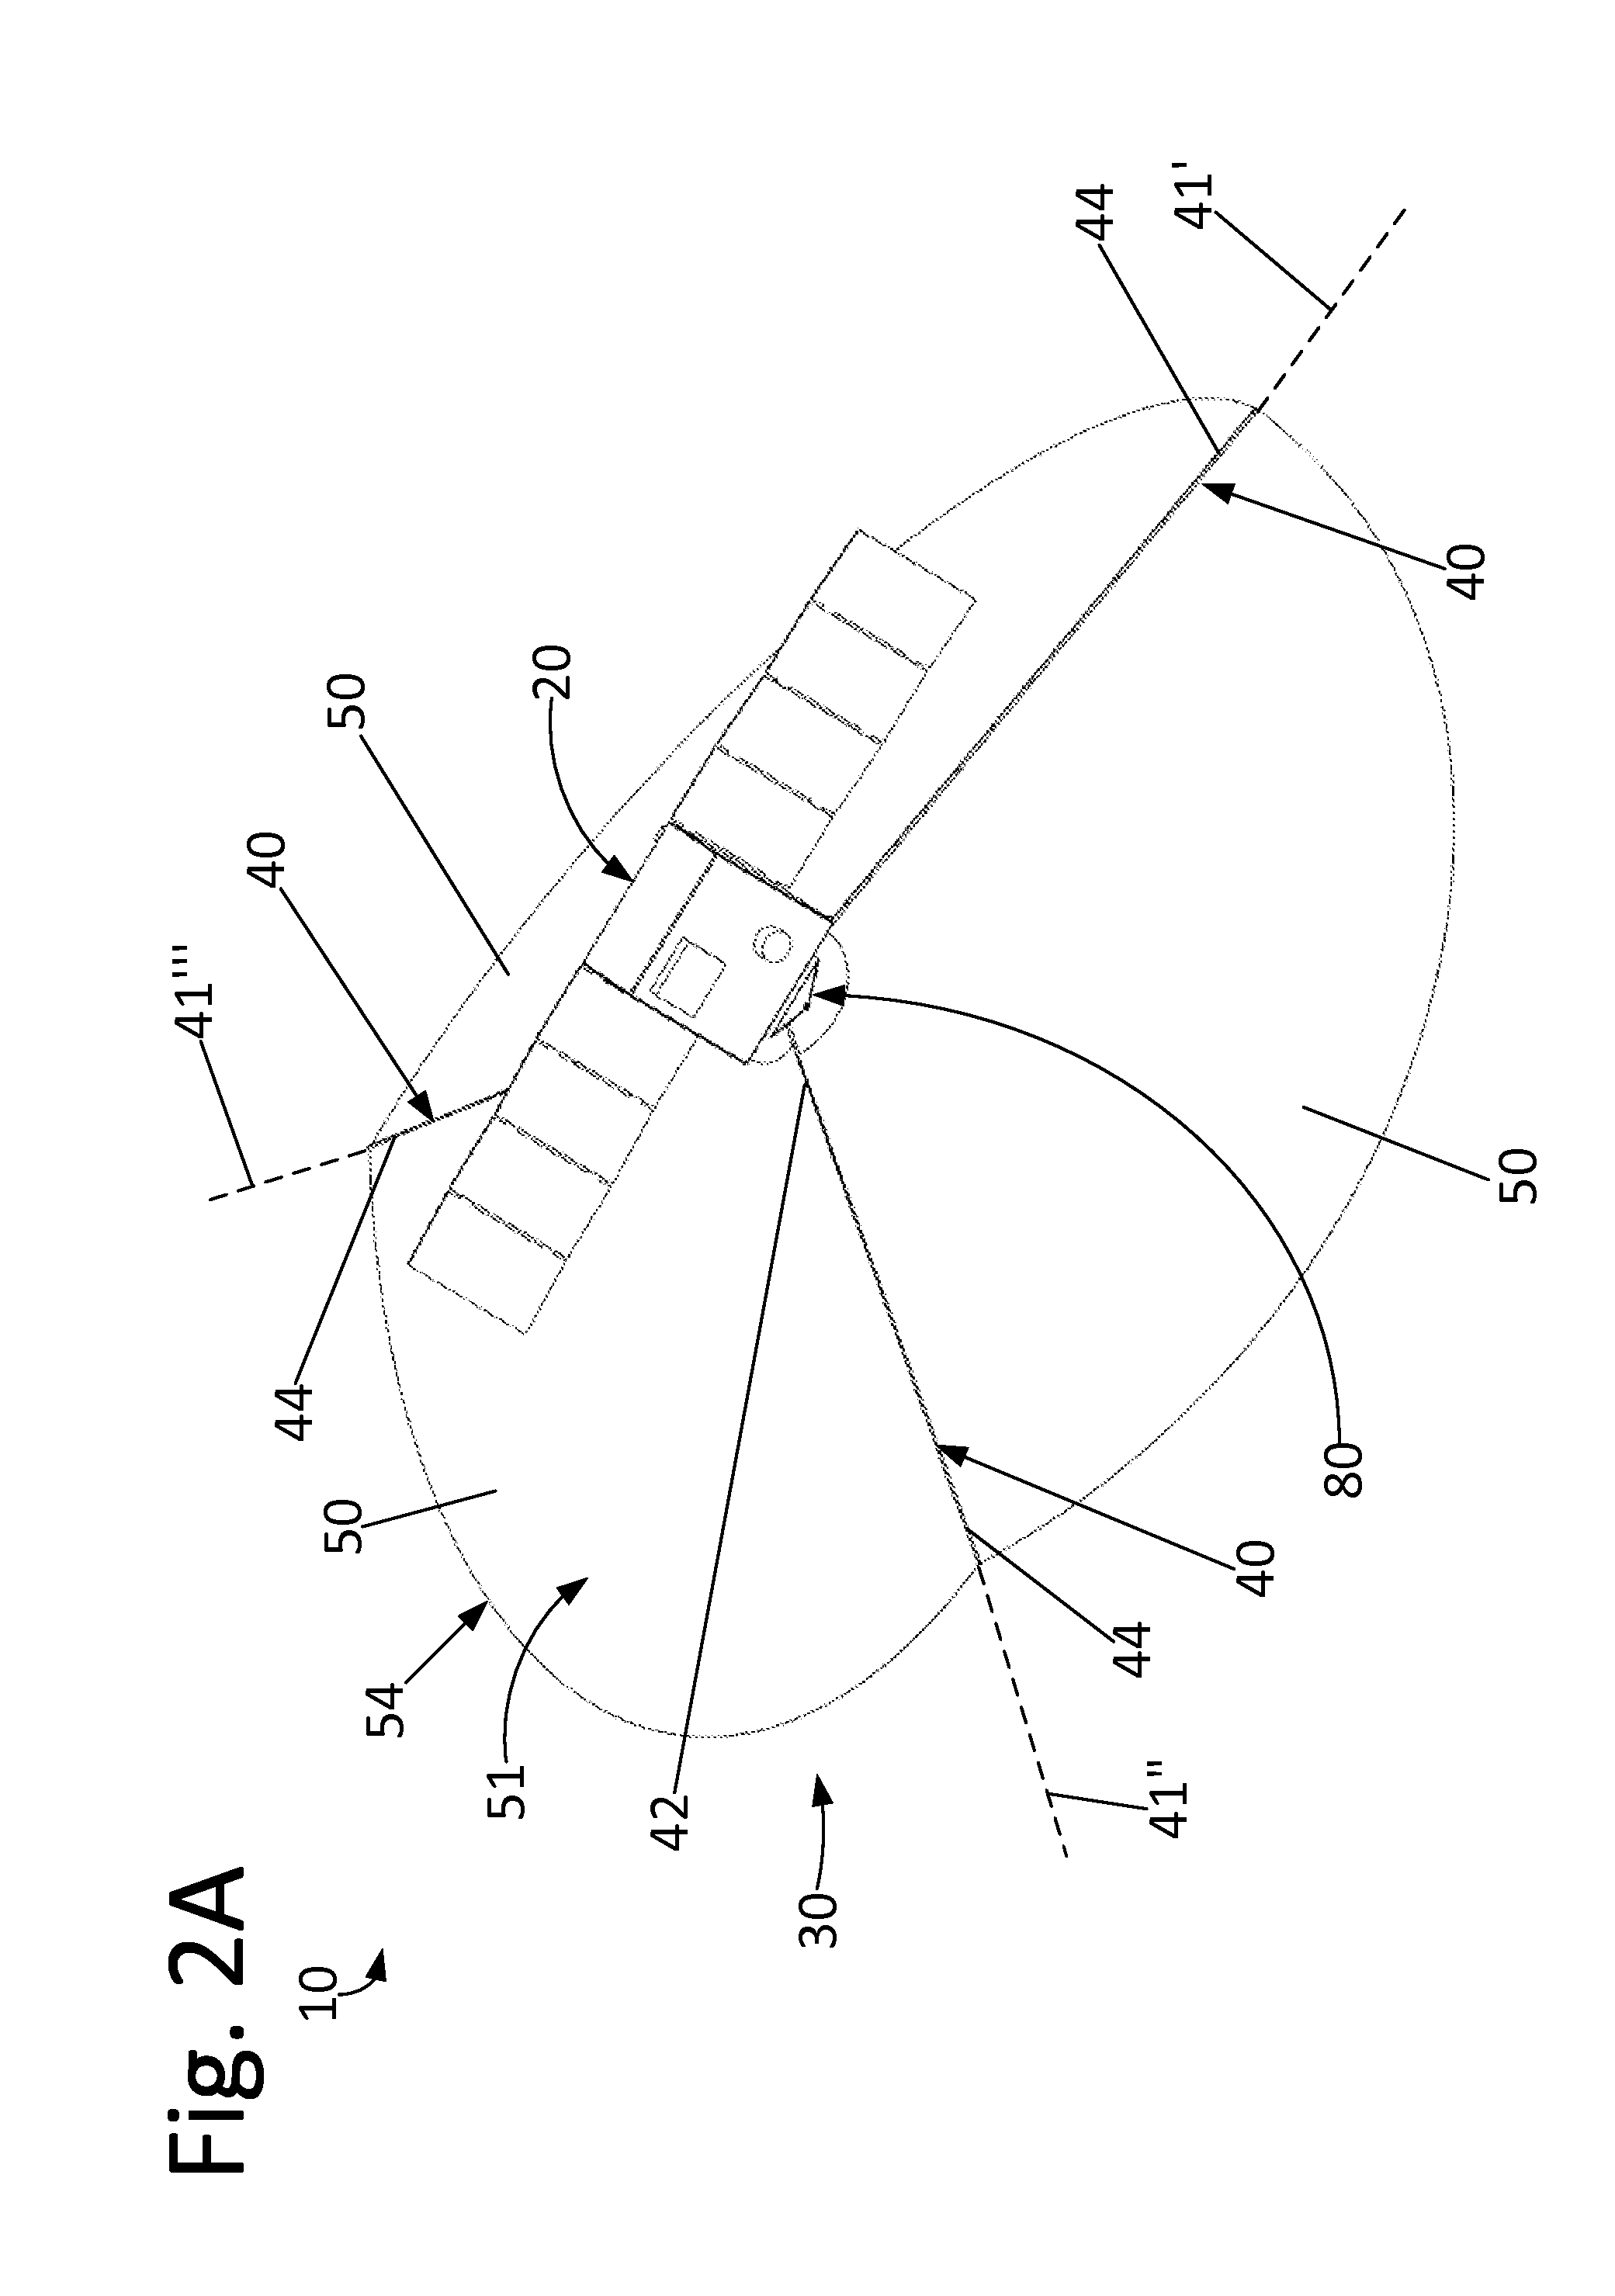 Gossamer apparatus and systems for use with spacecraft